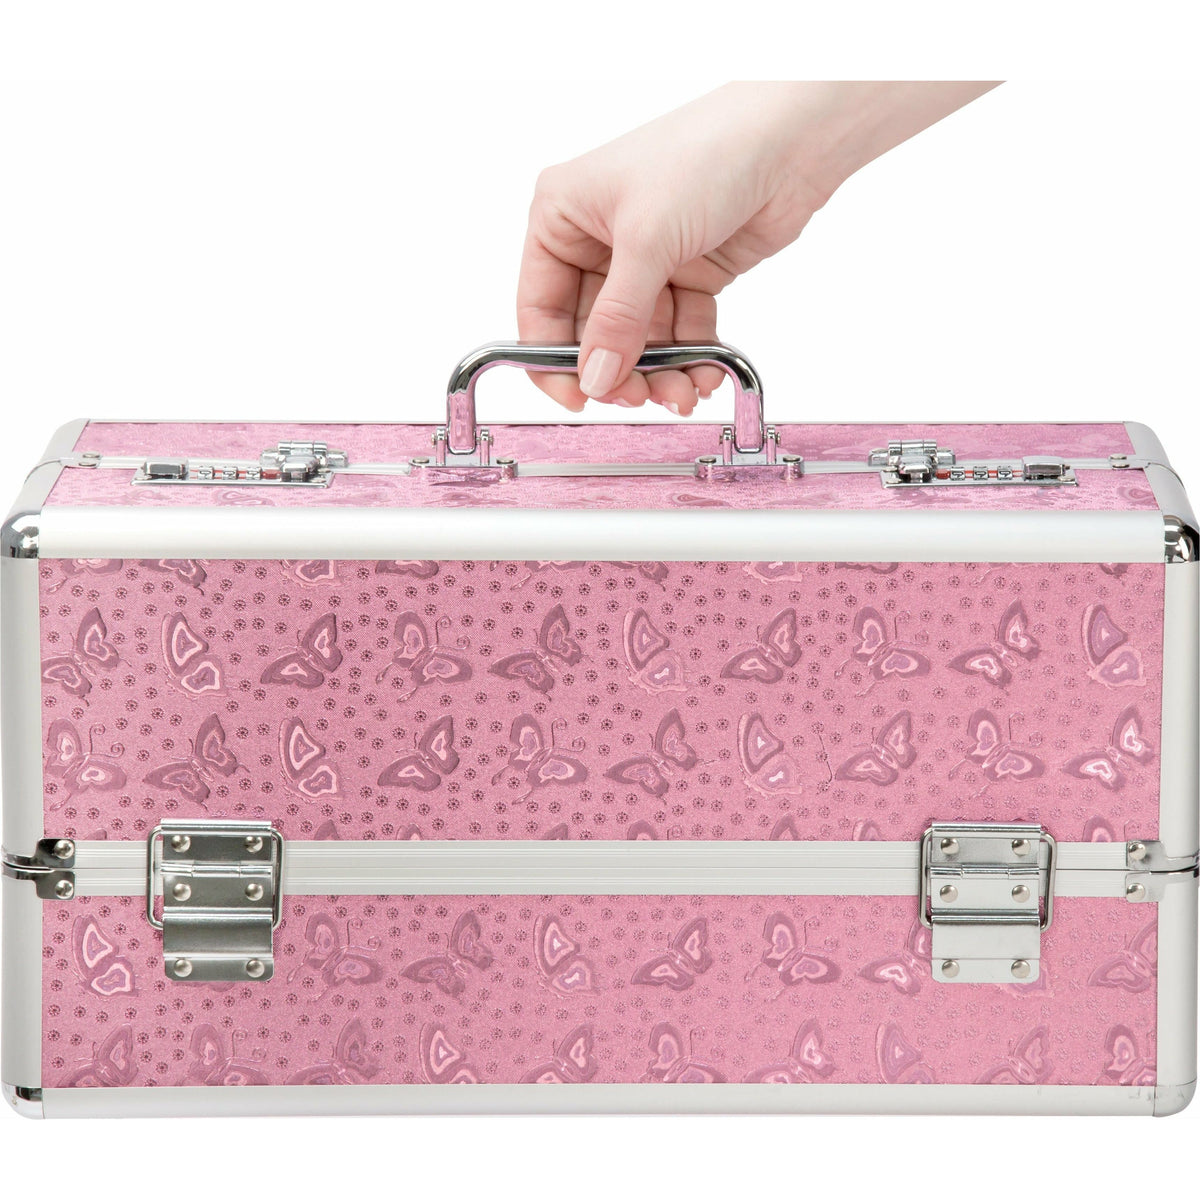 PowerBullet Simple and True - Simple and True - Large Lockable Vibrator Case - Pink